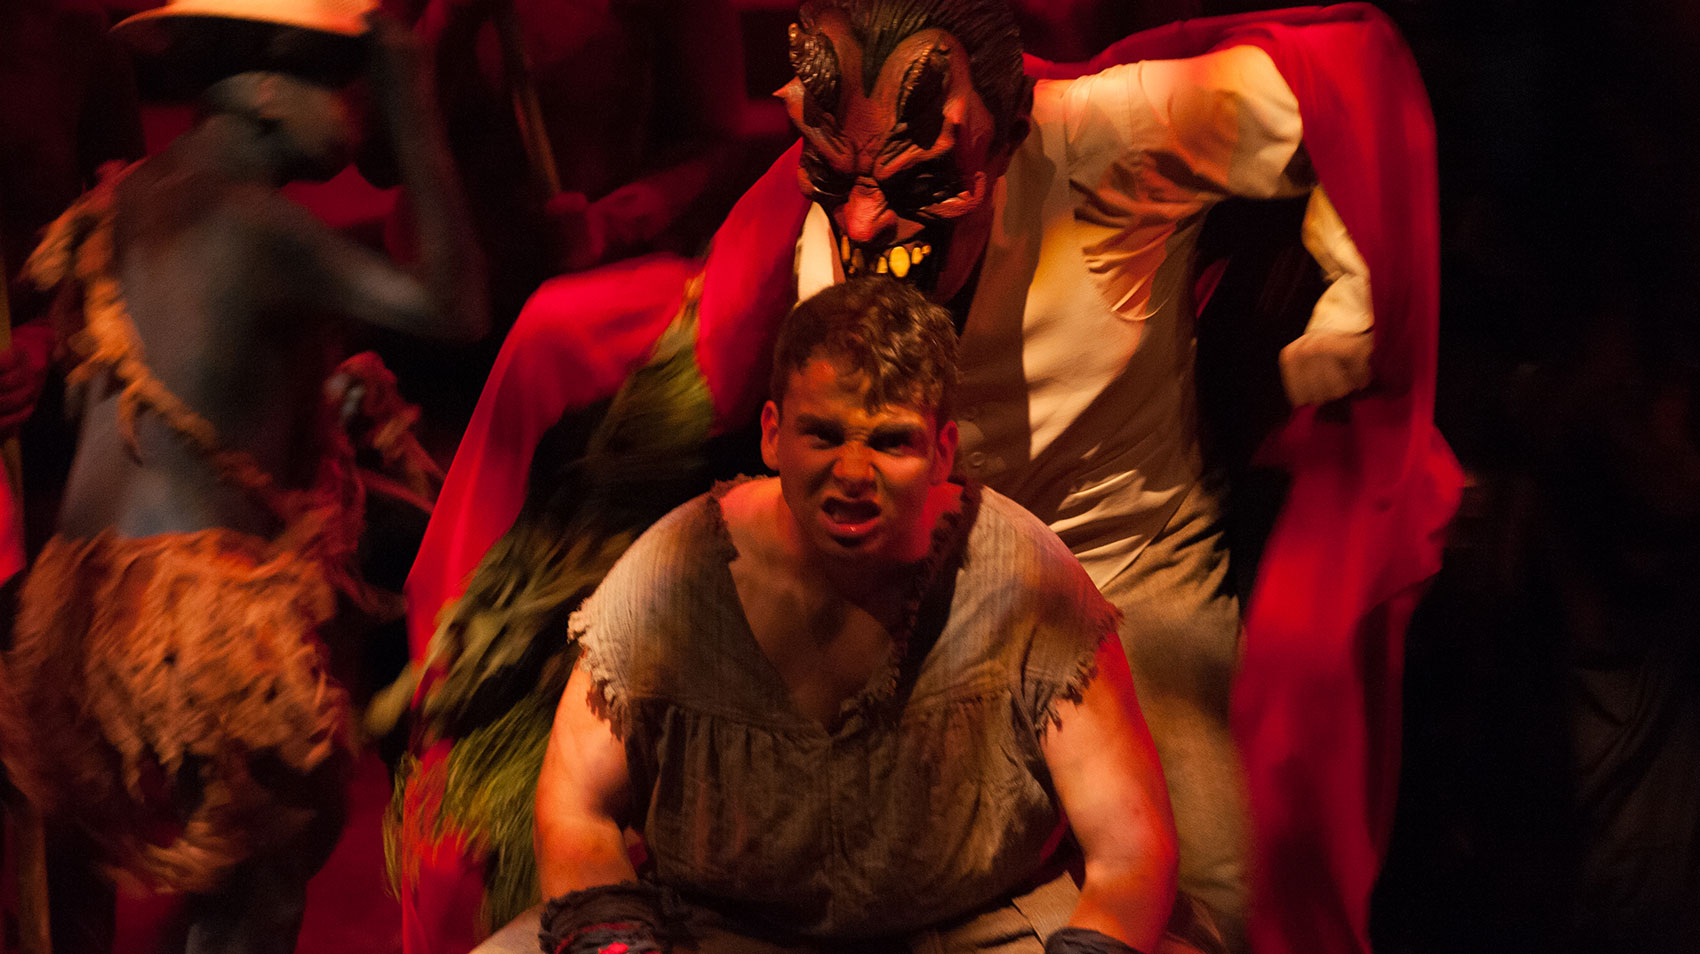 A character snarls facing the audience and is flexing his muscles, while a character resembling a devil figure stands over the first character as if goading him on.